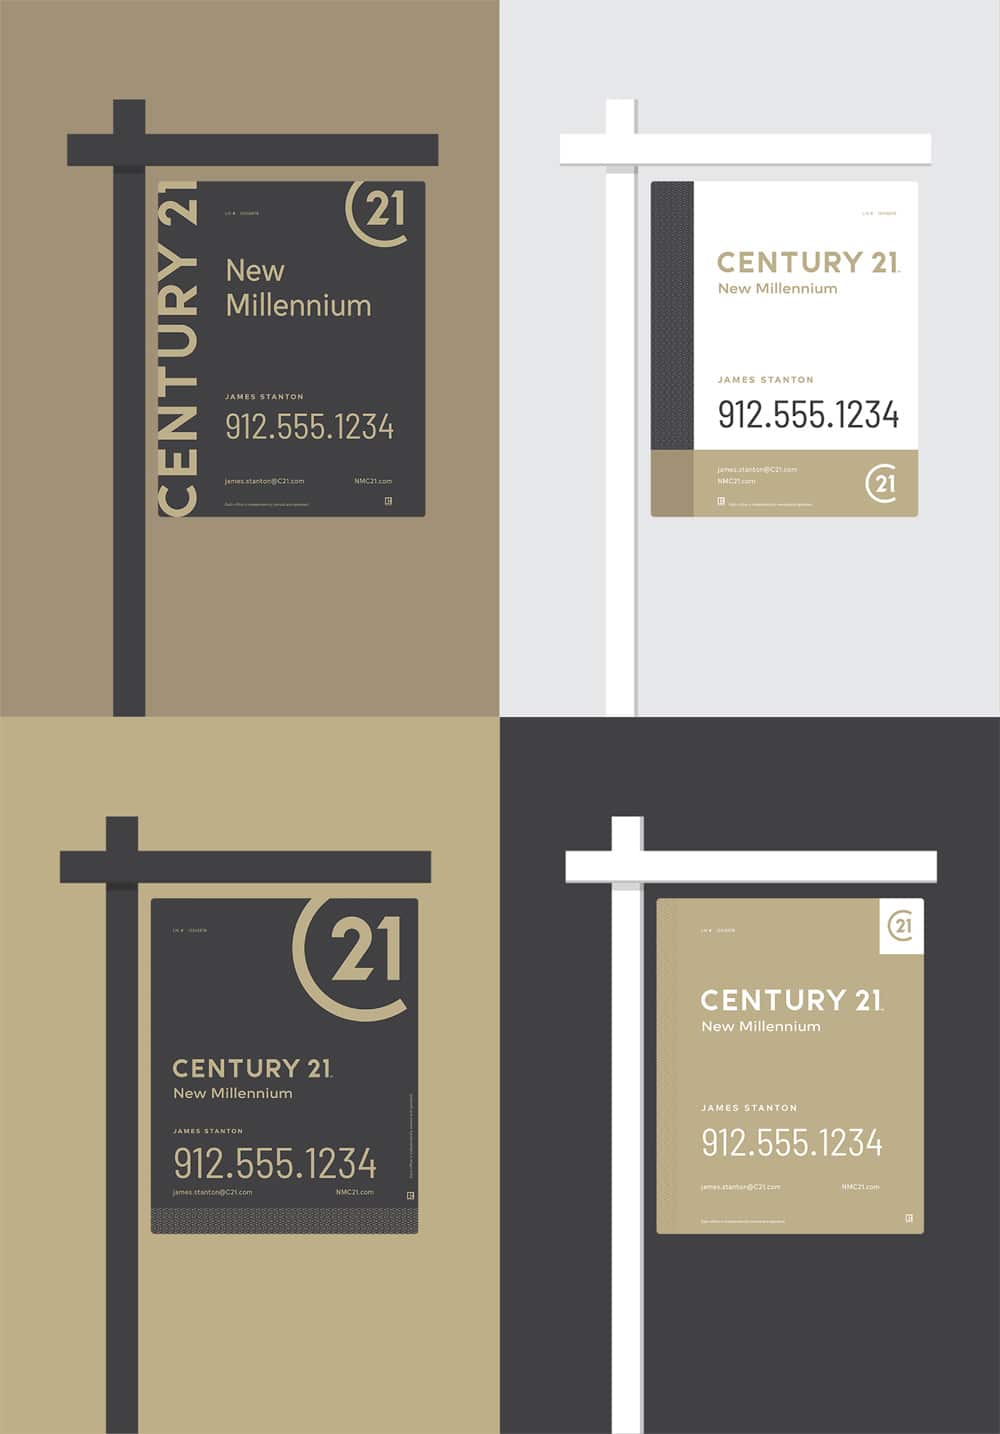 Yard Signs - Century 21 Rebrand: A New Gold Standard for the Bitcoin Era?